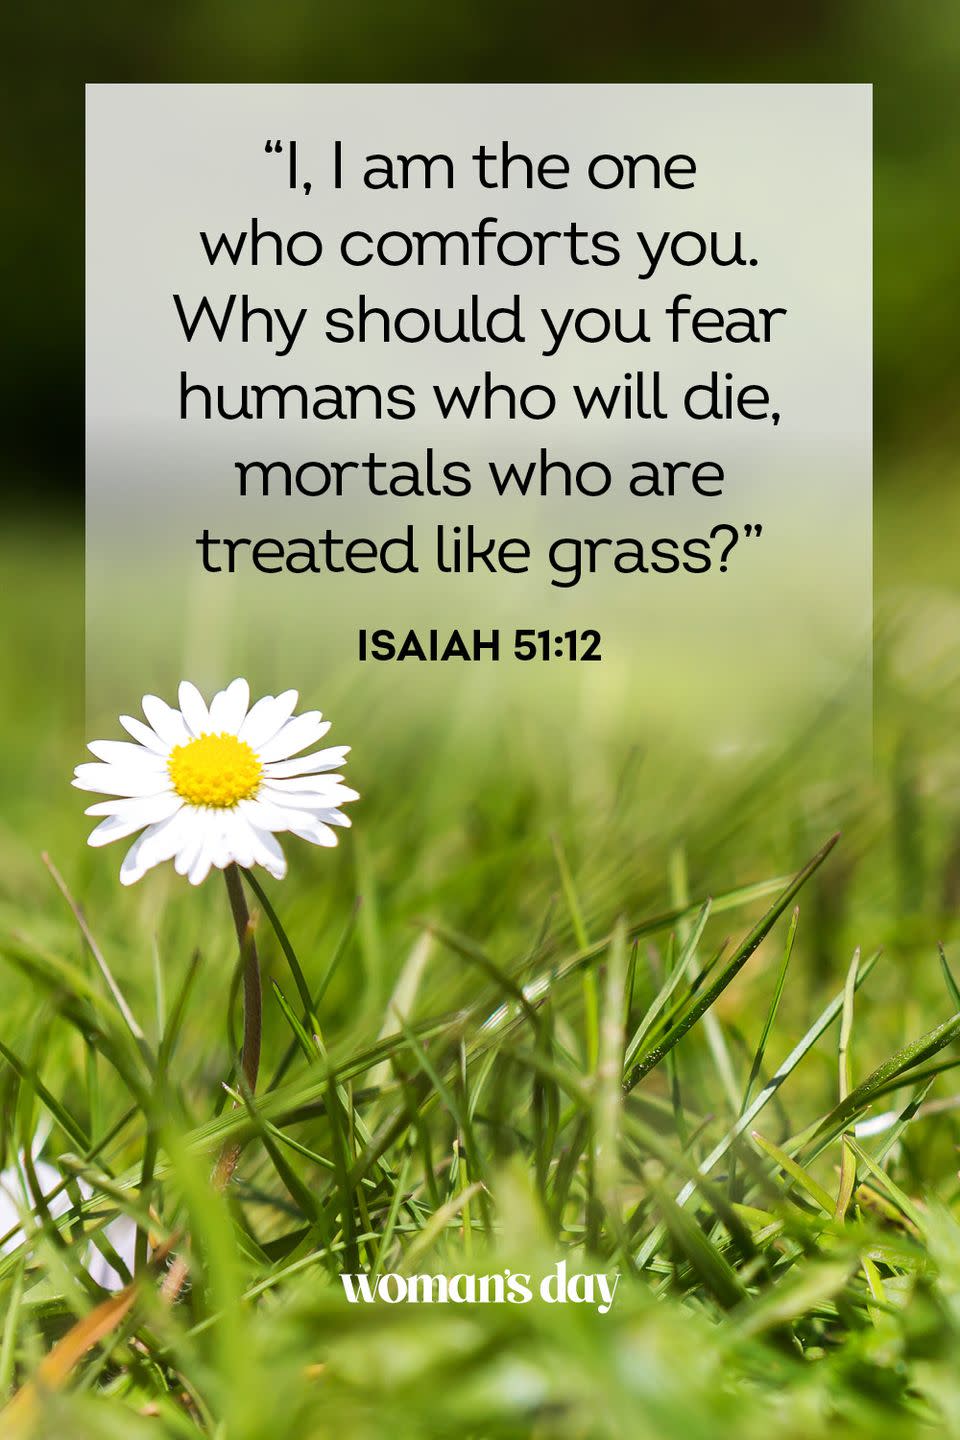 <p>“I, I am the one who comforts you. Why should you fear humans who will die, mortals who are treated like grass?” </p>